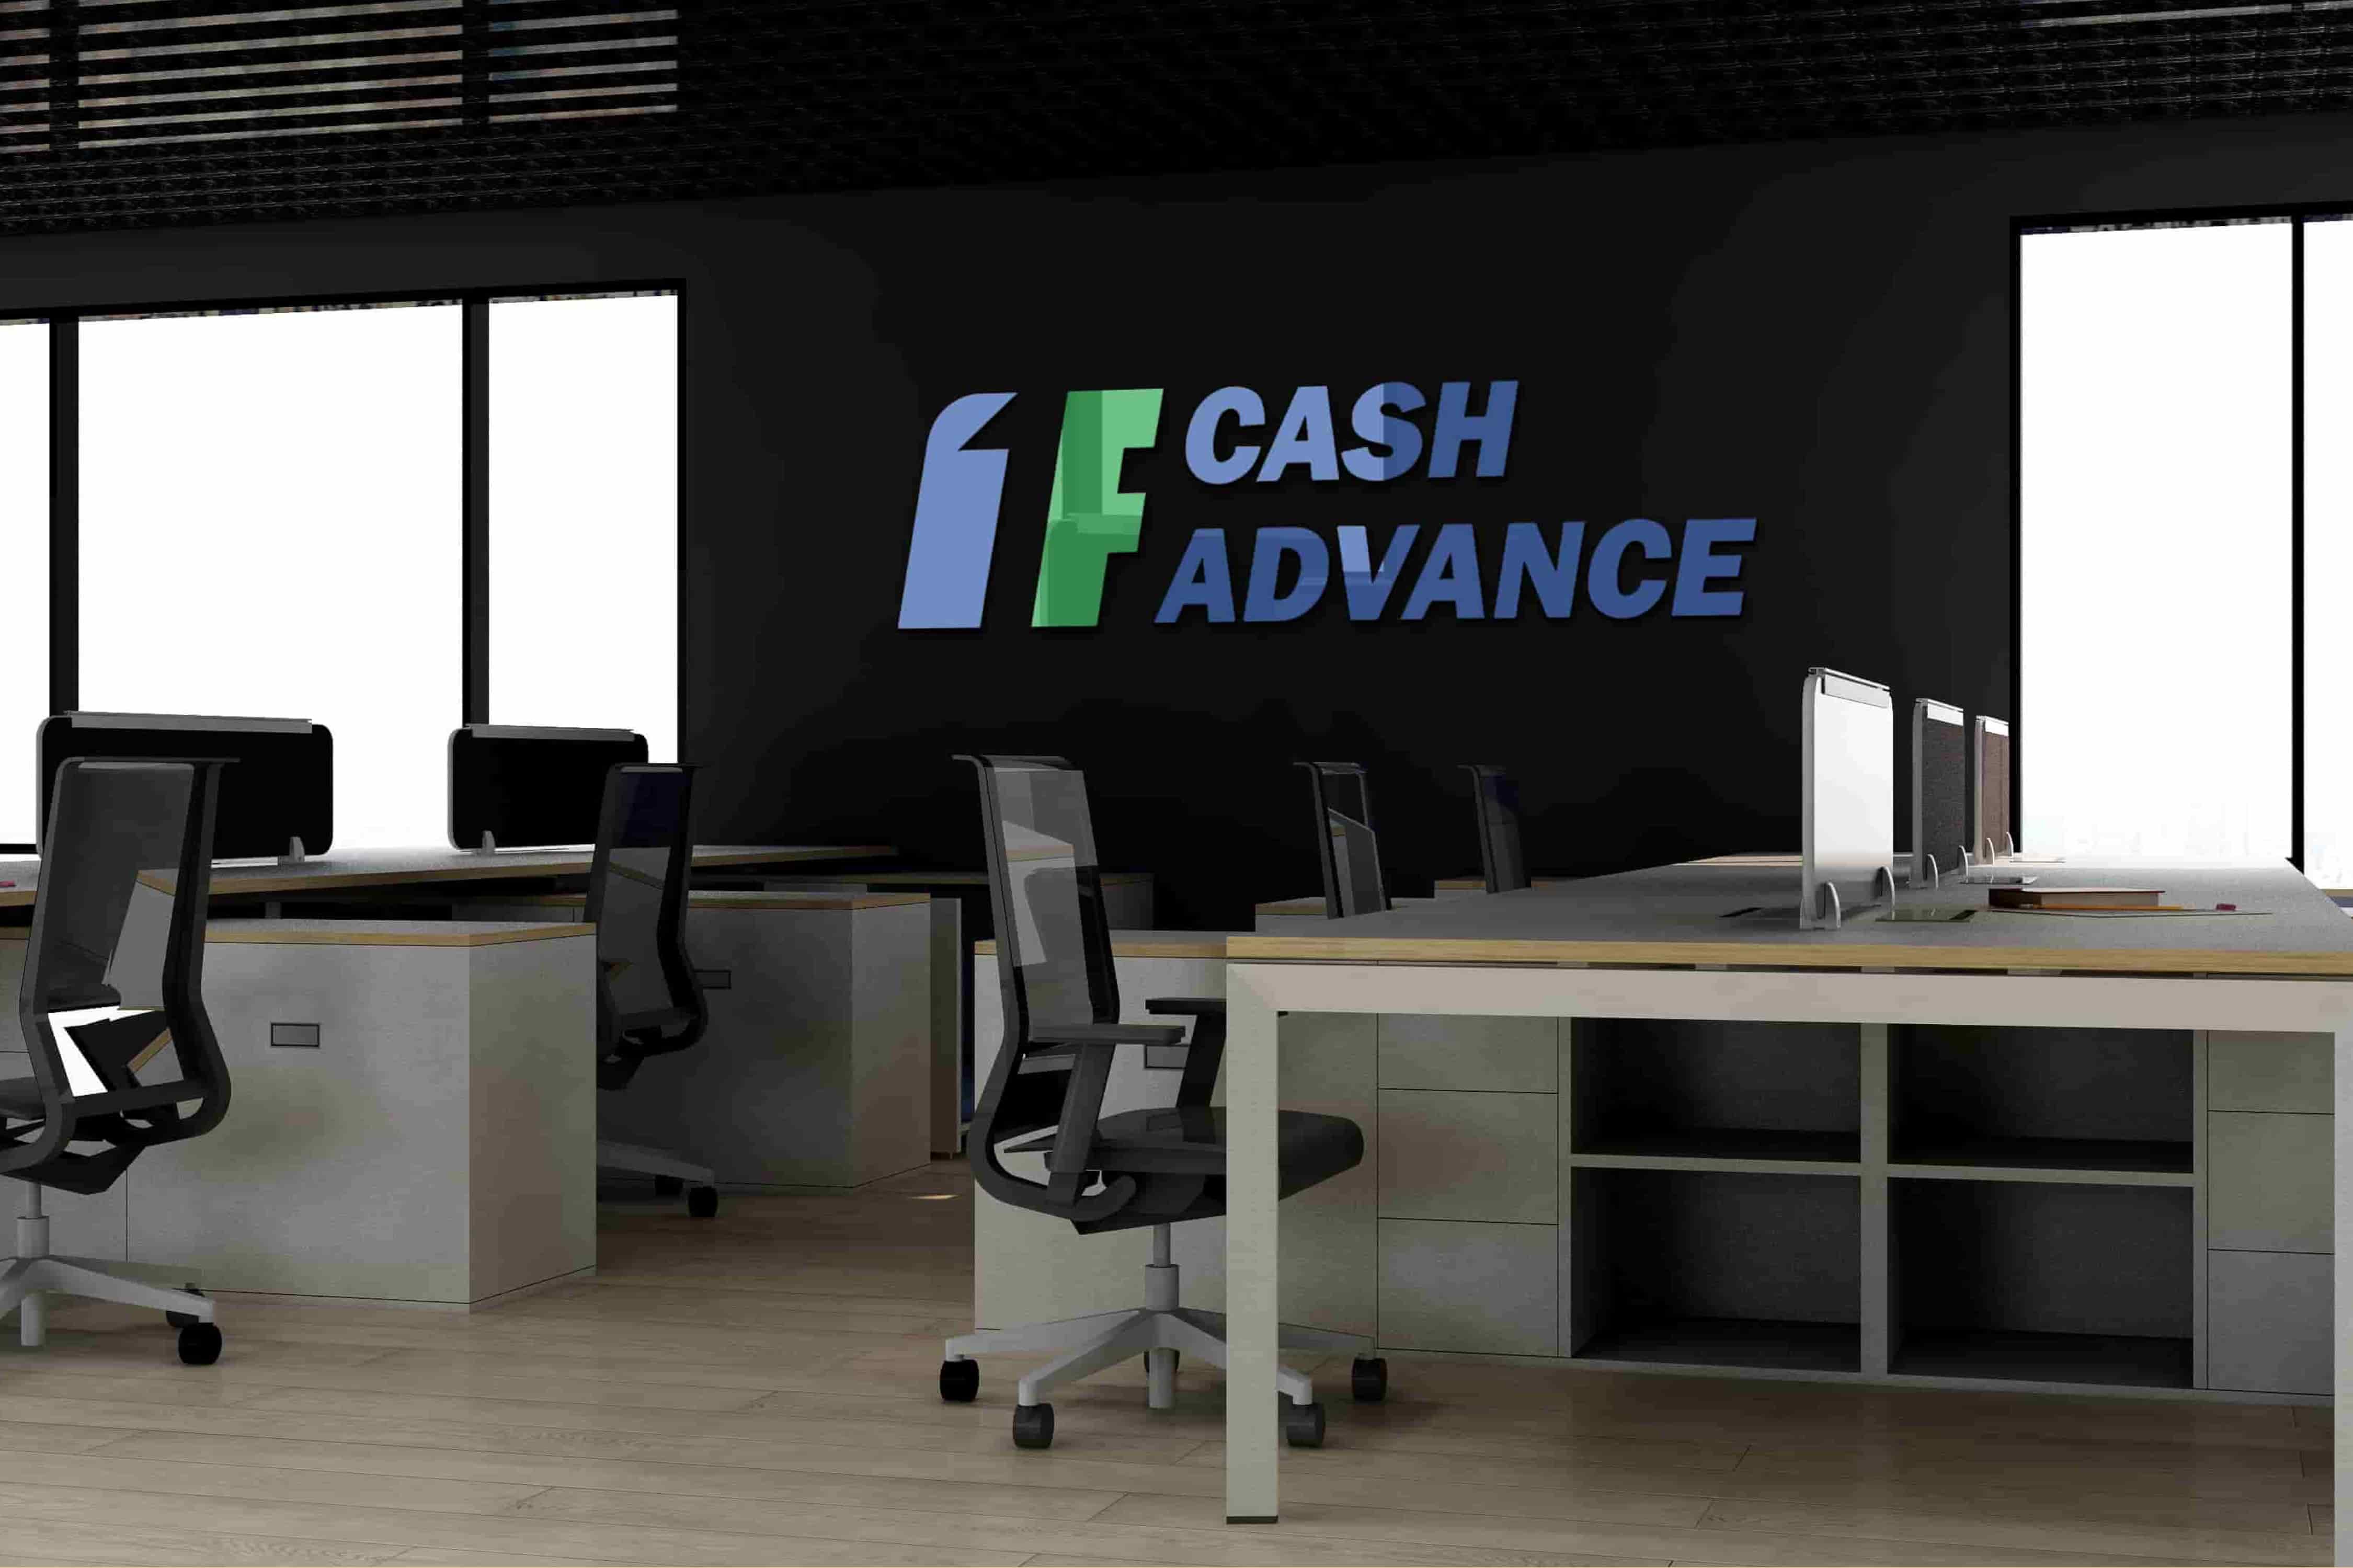 1F Cash Advance payday loans in VT